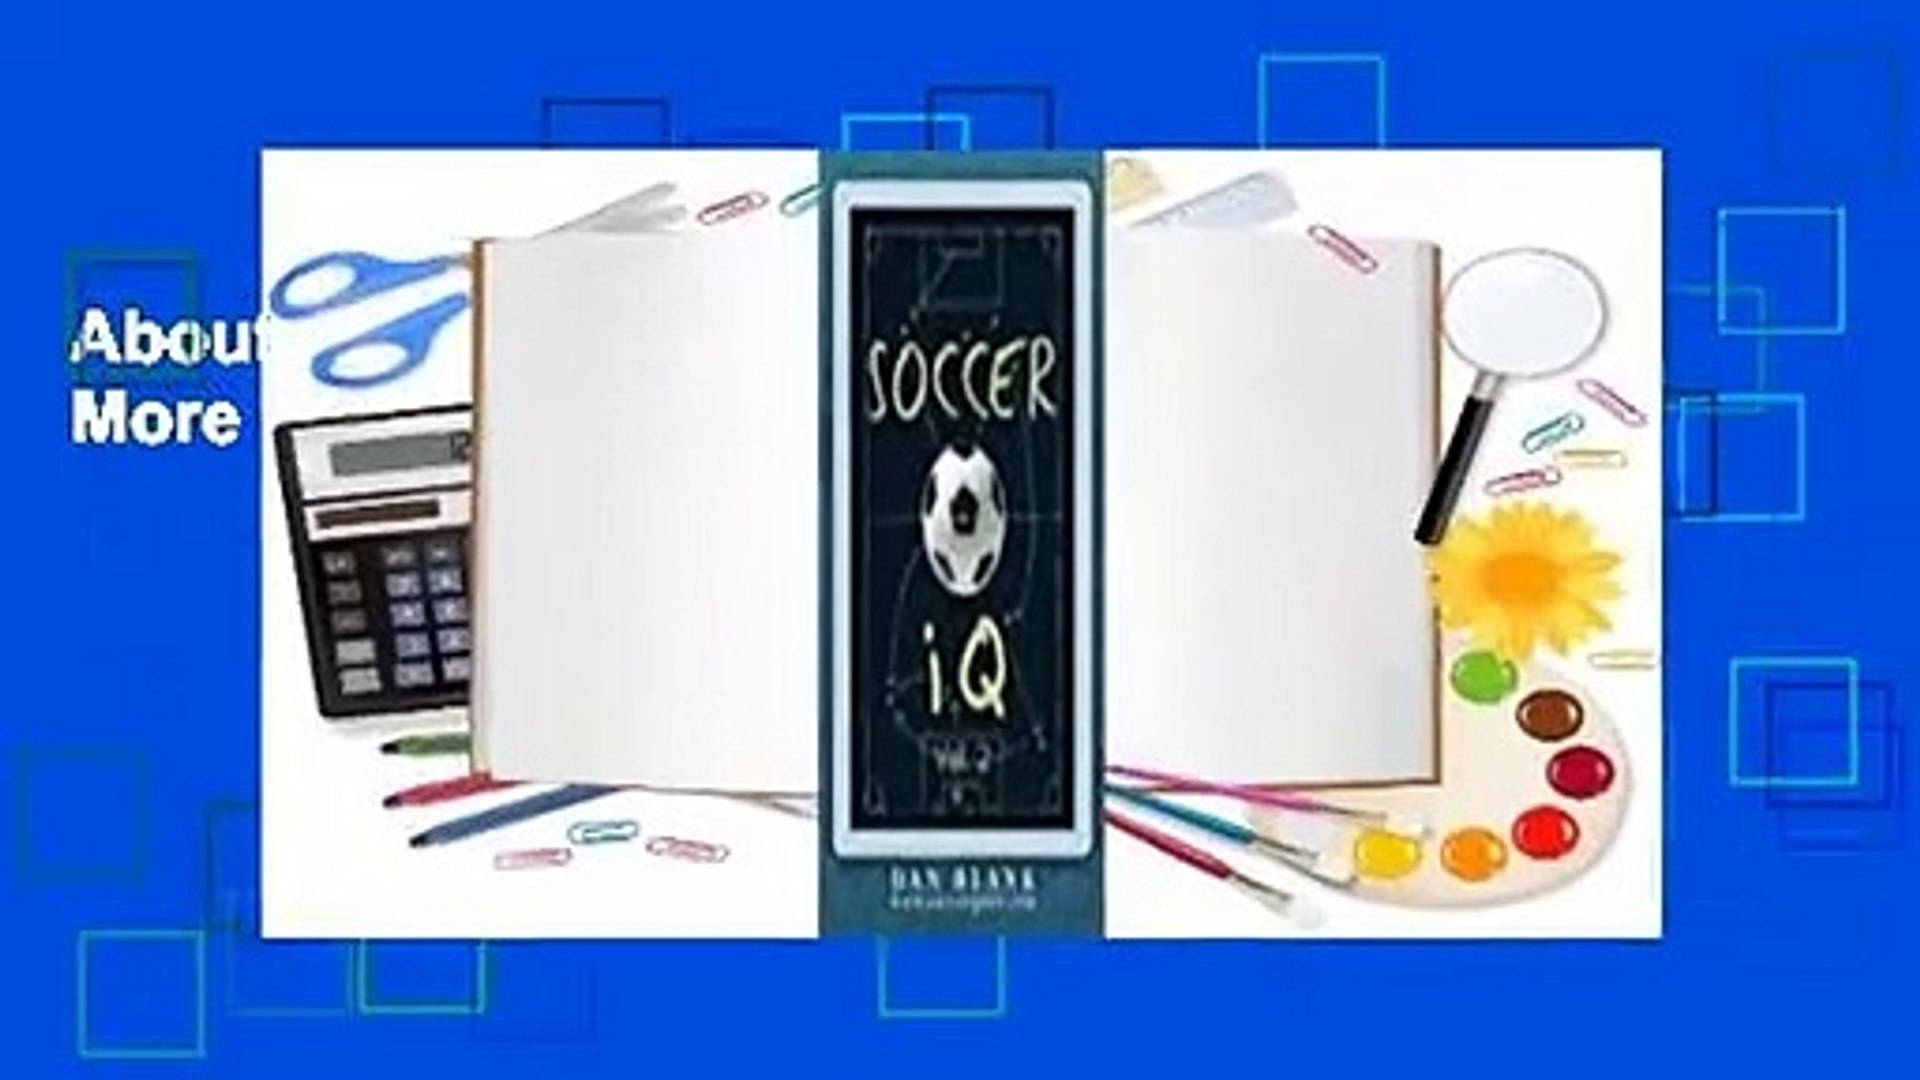 About For Books  Soccer iQ - Vol. 2: More of What Smart Players Do Complete